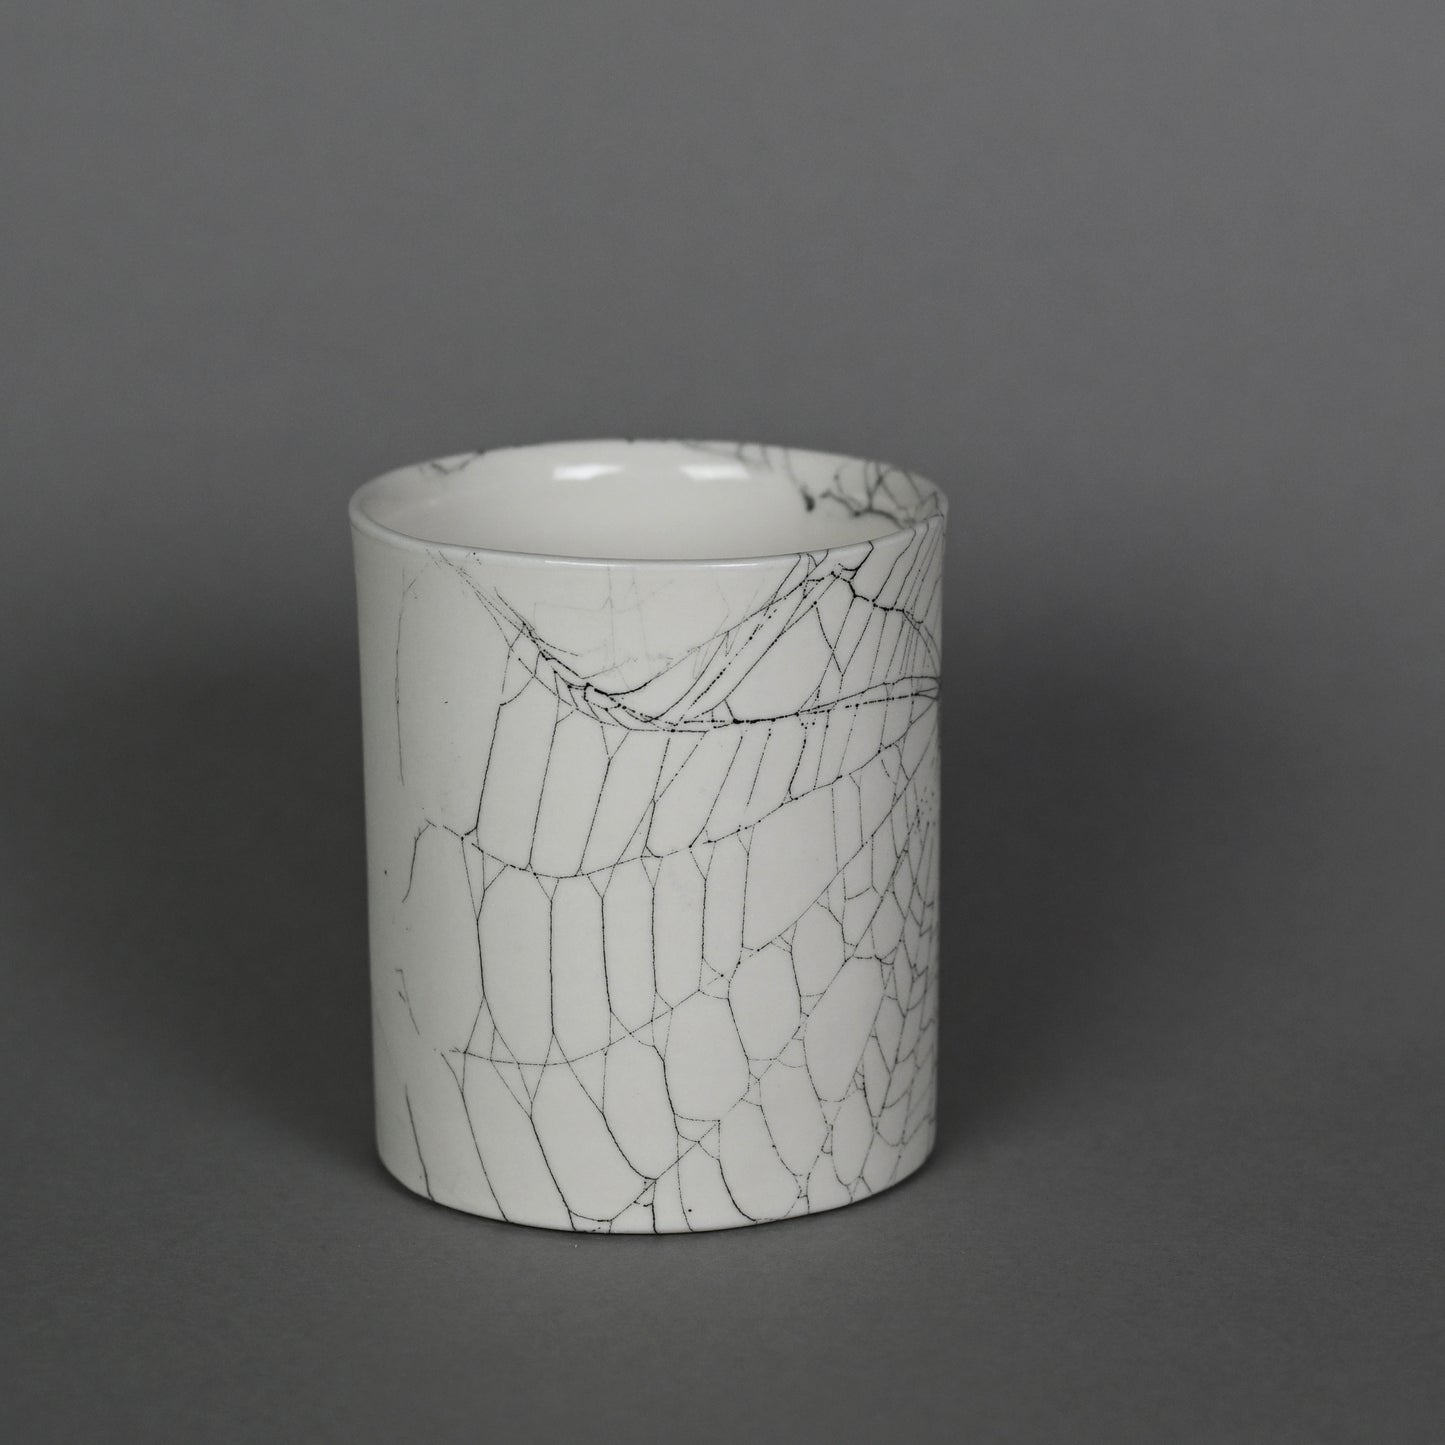 Web on Clay (212), Collected October 03, 2022